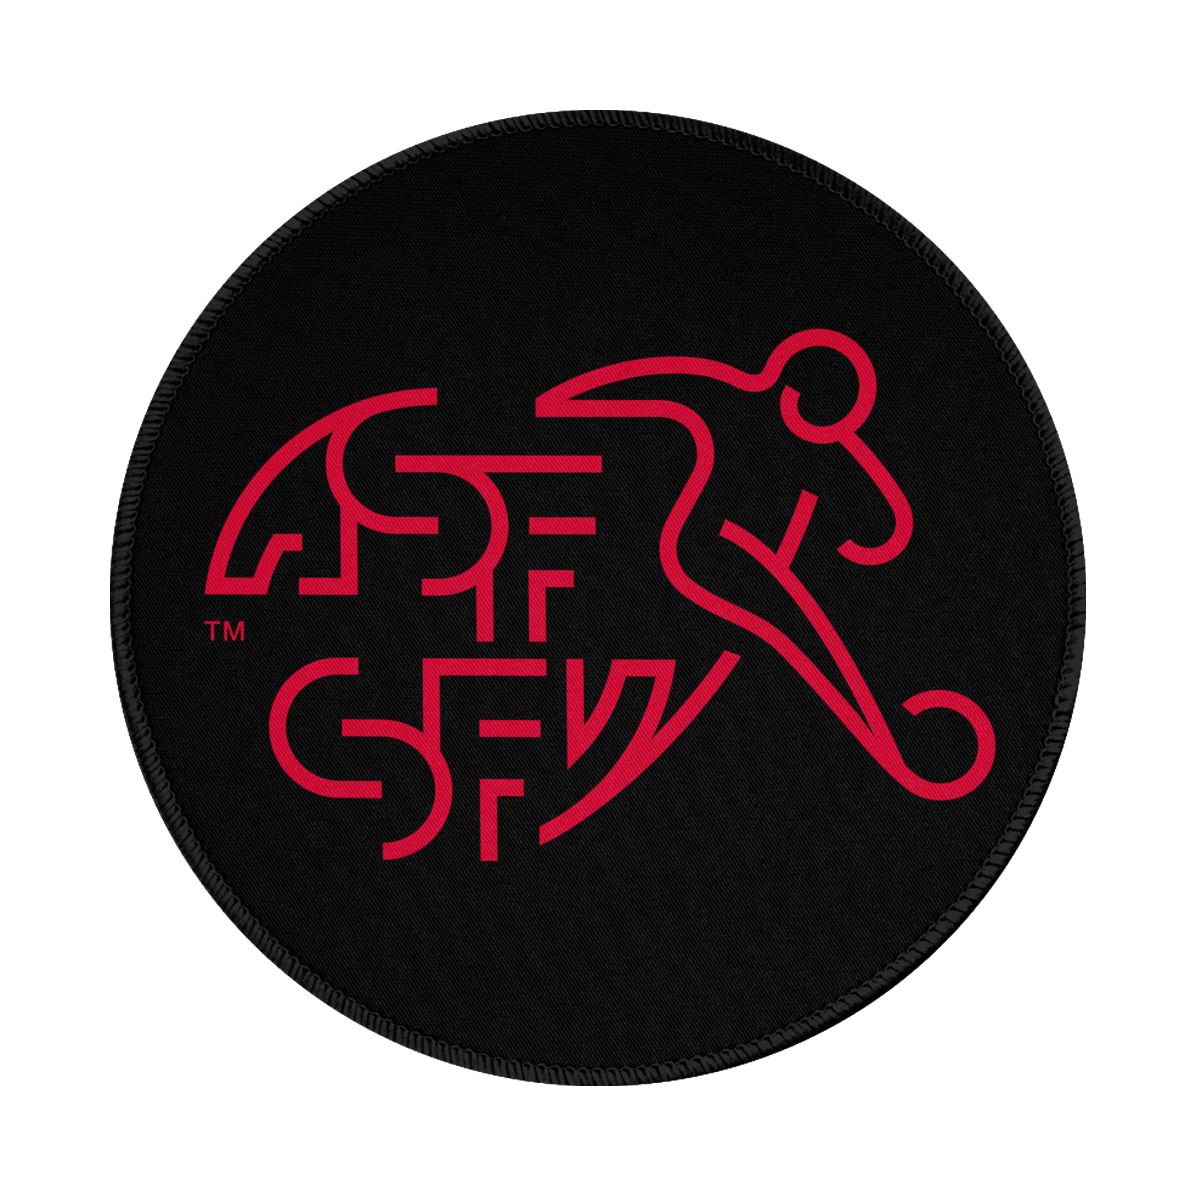 Switzerland National Football Team Gaming Round Mousepad for Computer Laptop